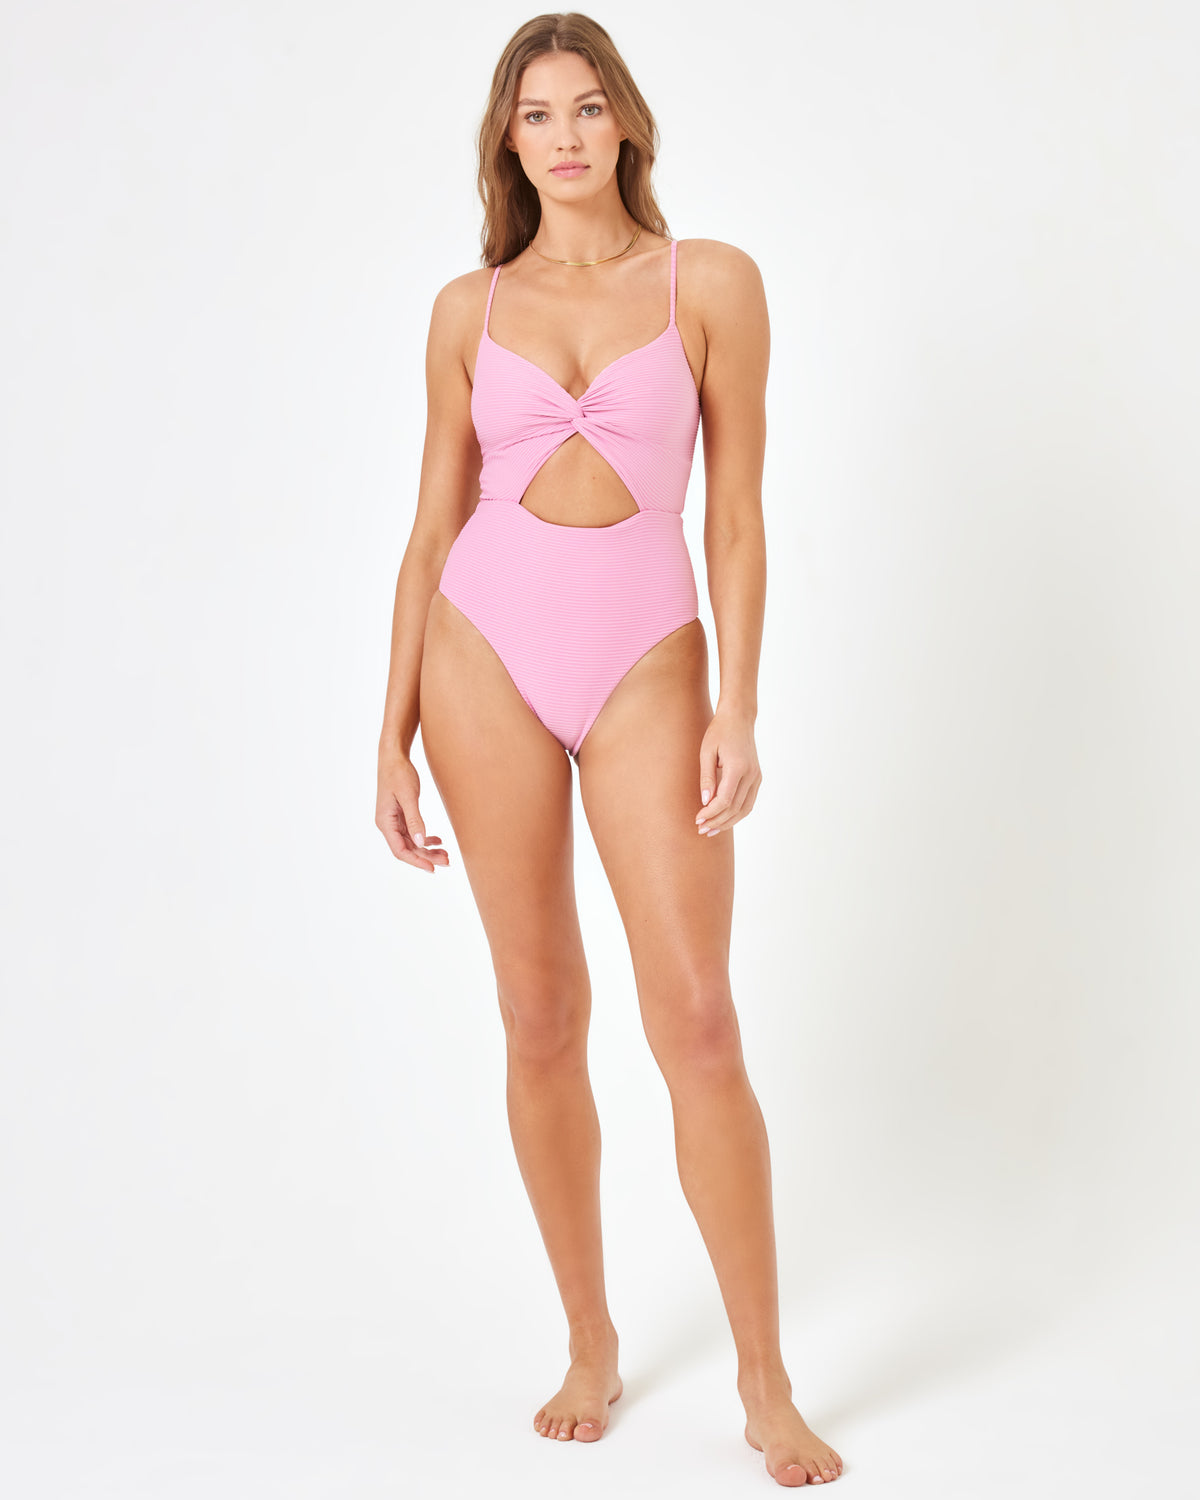 LSPACE X Anthropologie Kyslee One Piece Swimsuit - Pink Lady Pink Lady | Model: Daria (size: S)